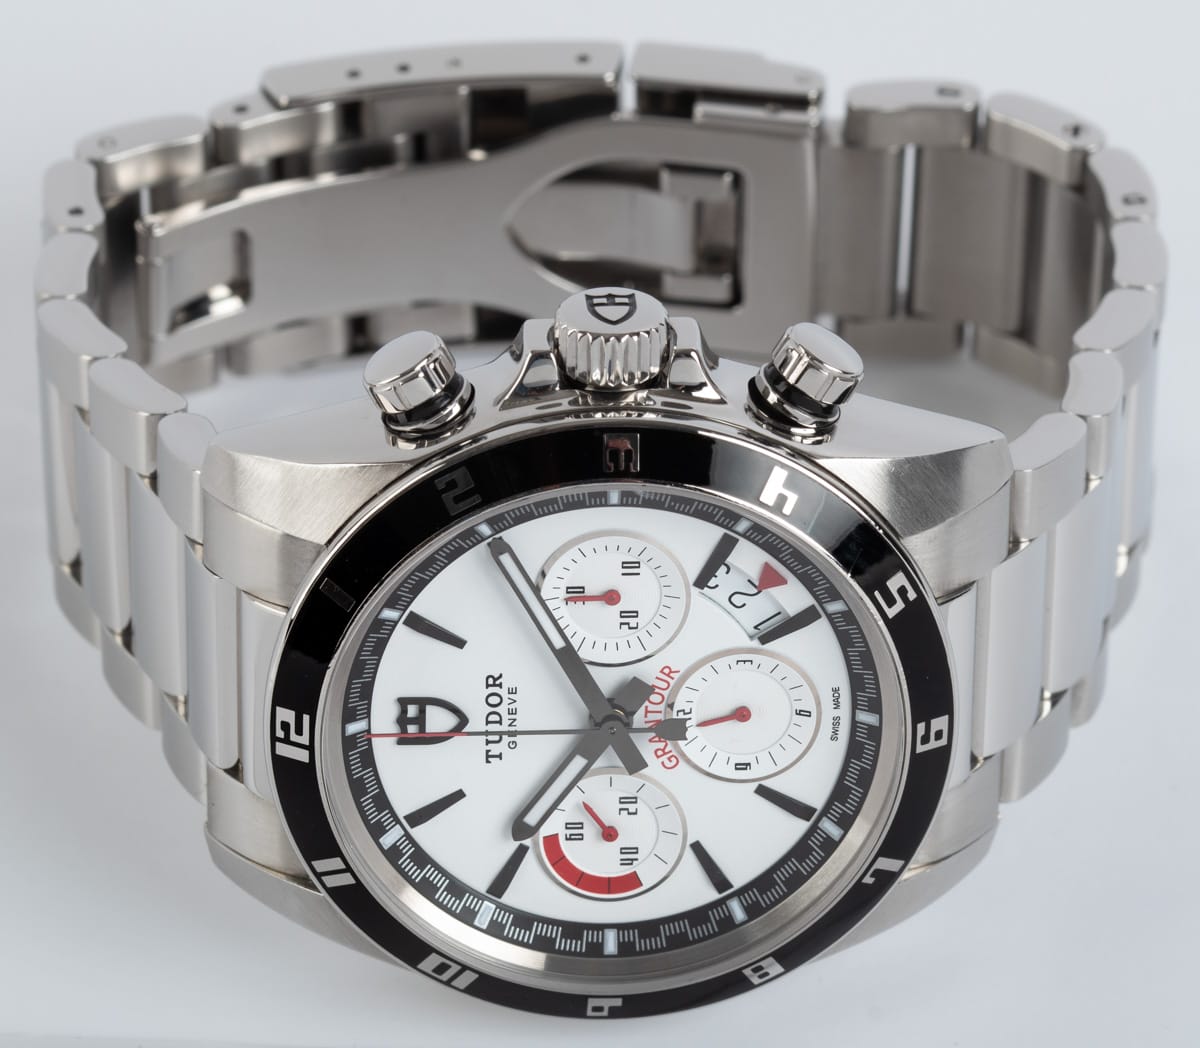 Front View of Grantour Chronograph